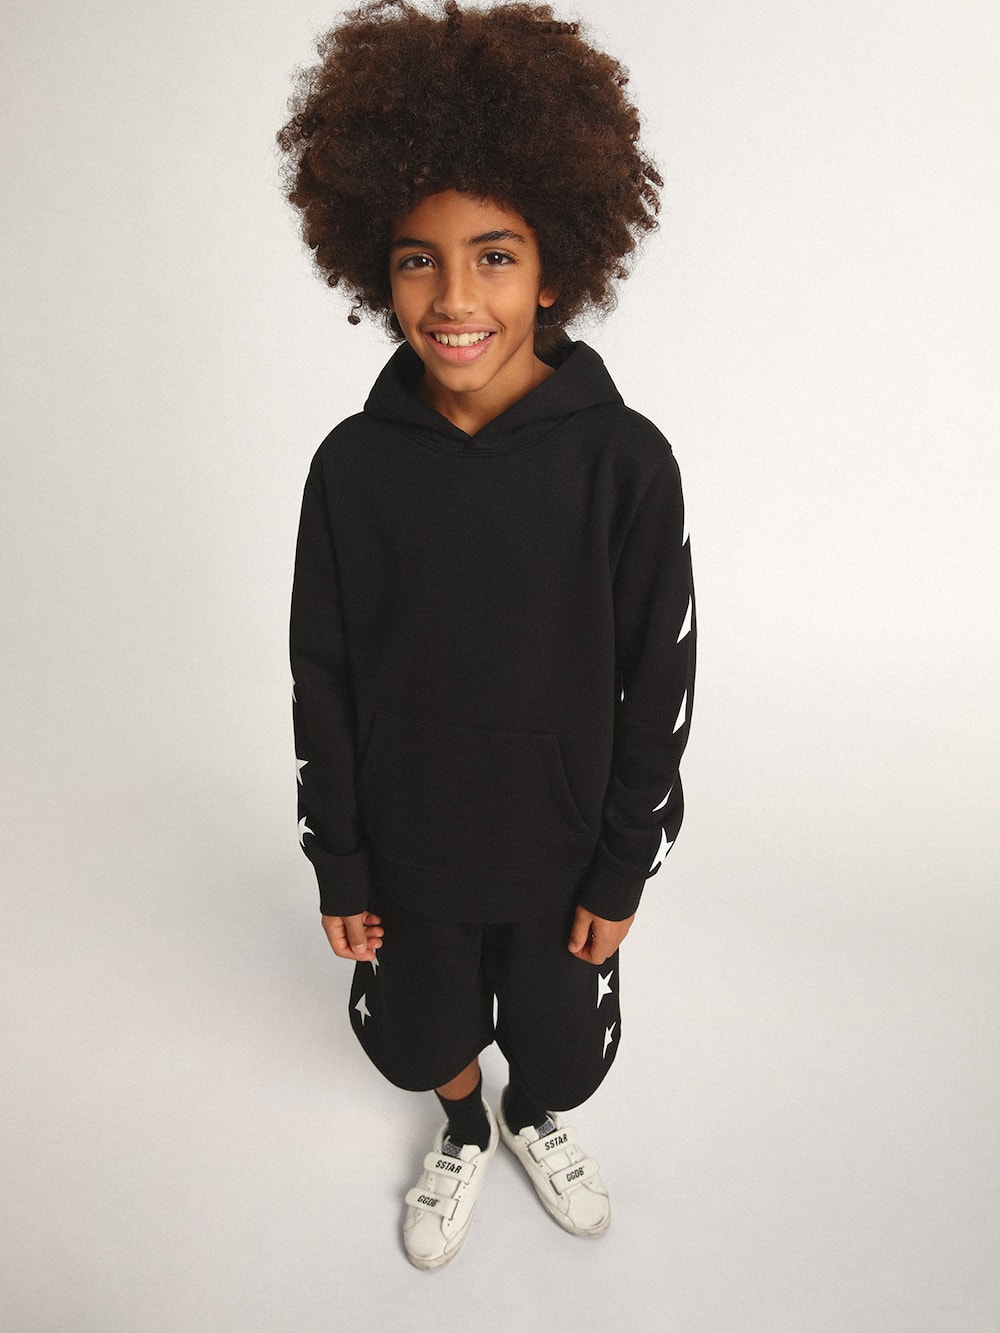 Golden Goose - Boys’ hooded sweatshirt in black with contrasting white stars in 